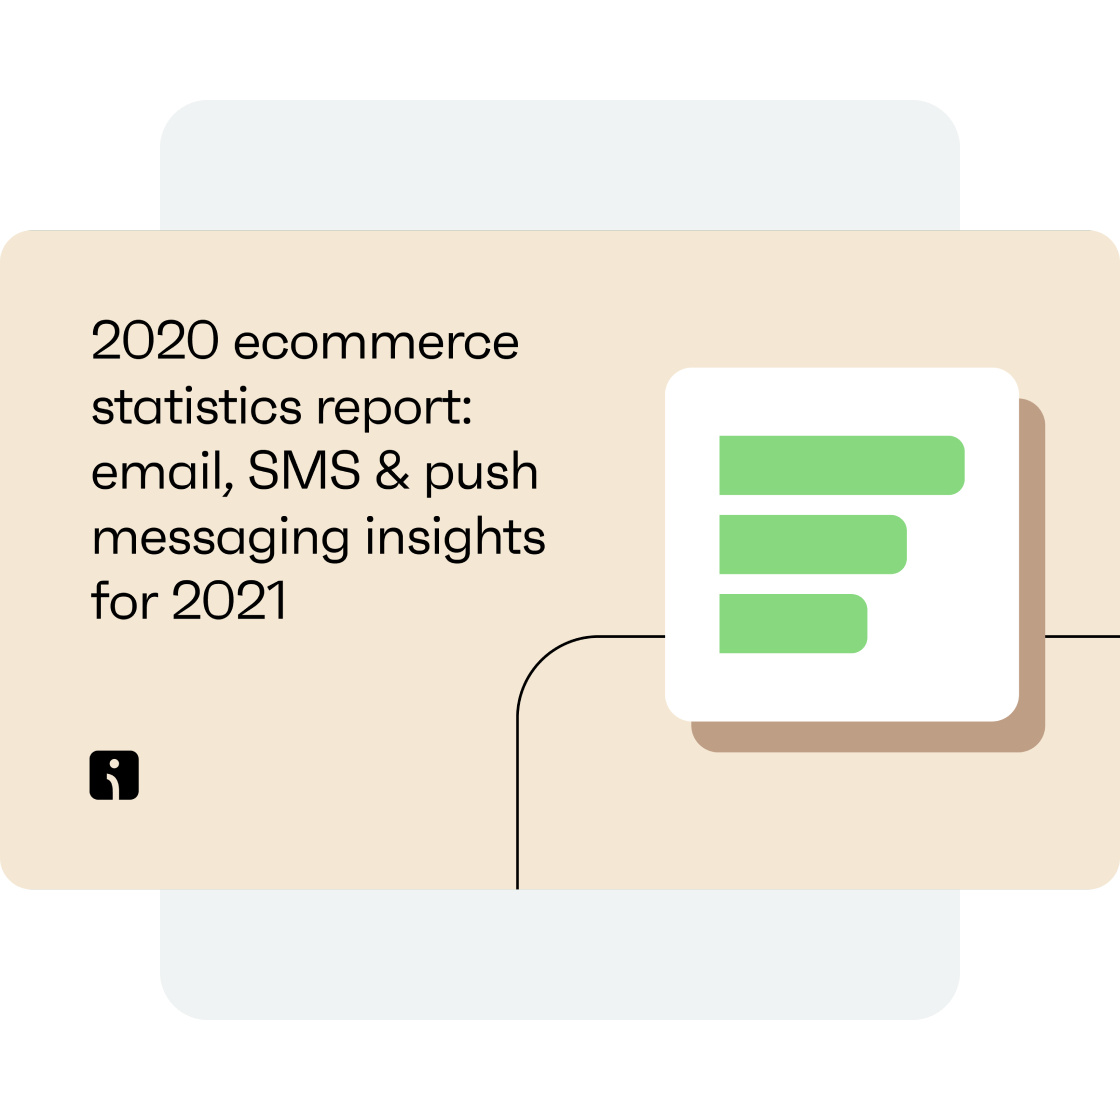 2020 ecommerce statistics report: Email, SMS & push messaging insights for 2021